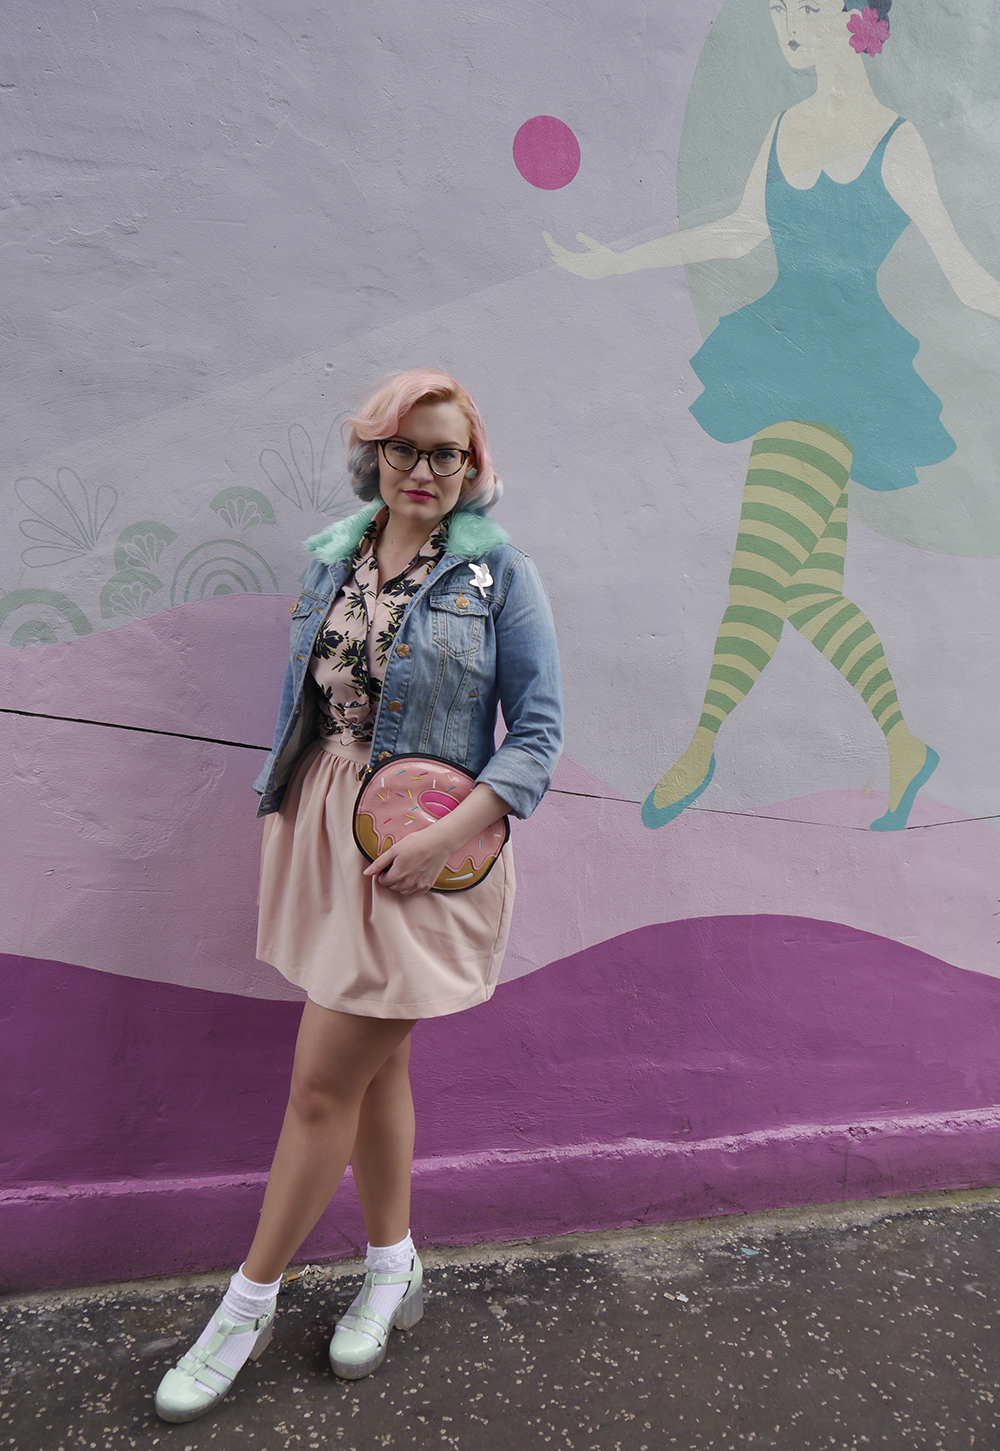 UK retro style blogger Kimberley Grahame wearing a customised 90s denim jacket and retro diner style outfit